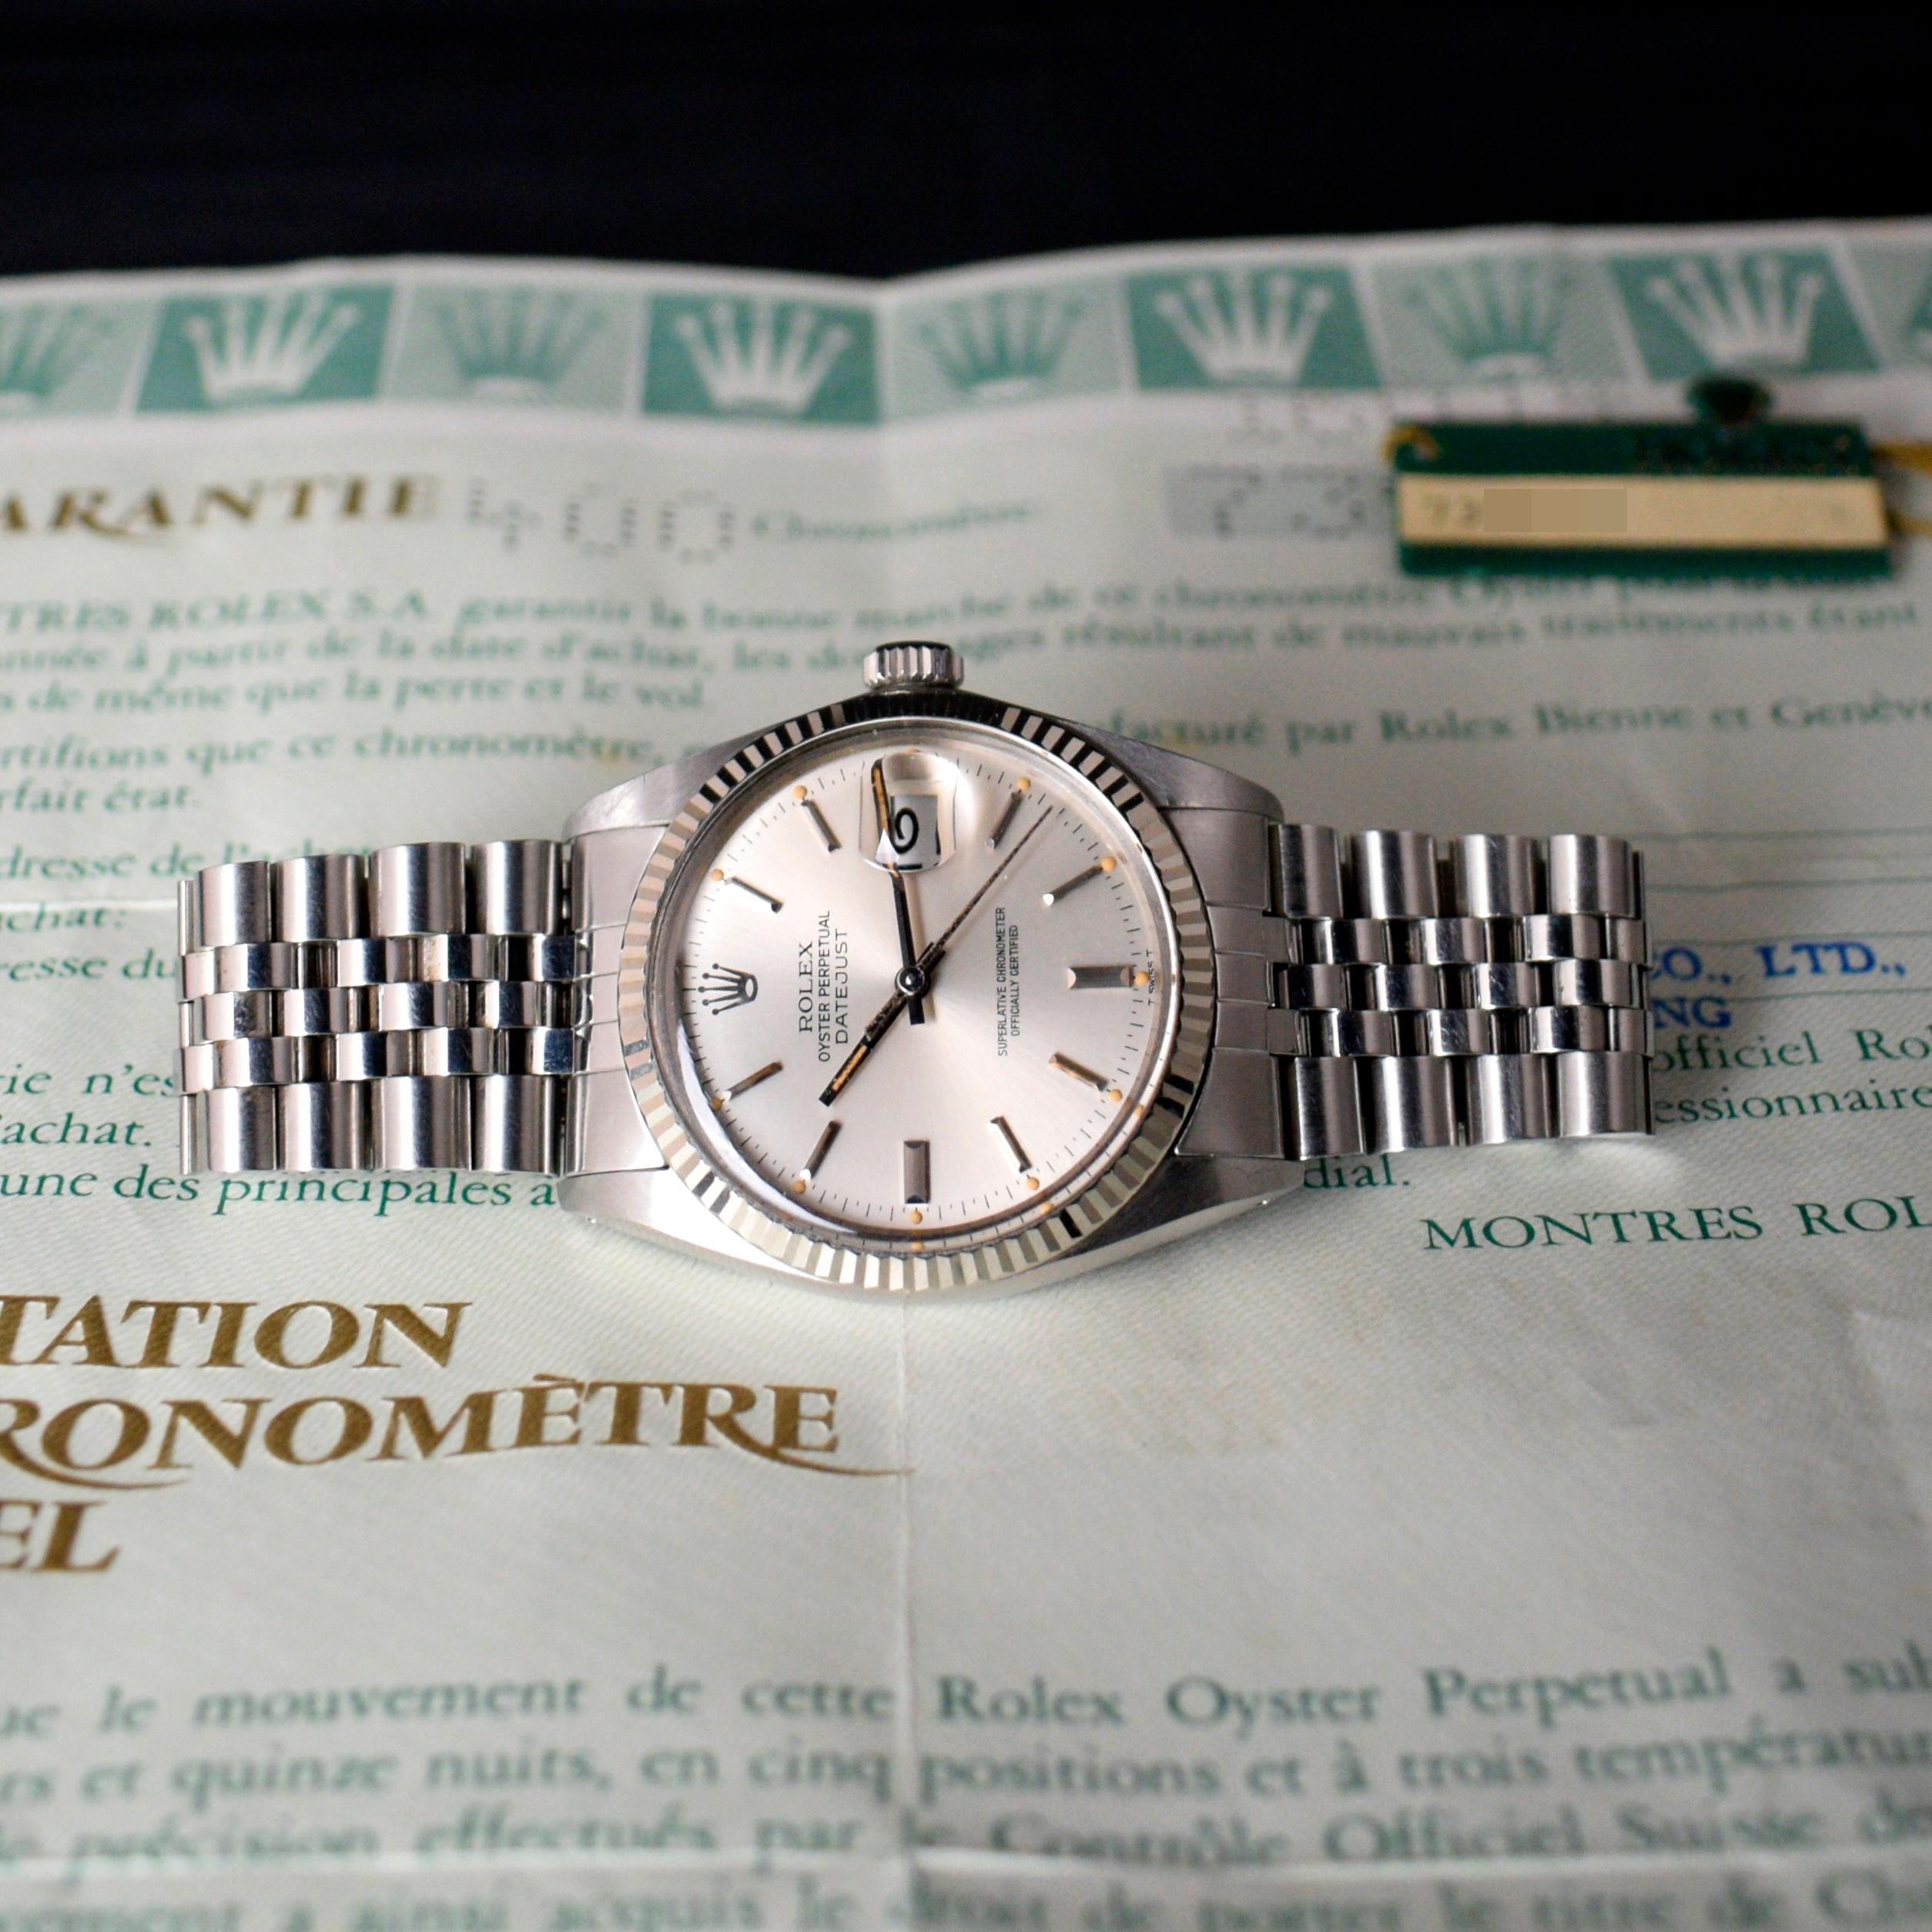 Brand: Vintage Rolex
Model: 16014
Year: 1982
Serial number: 73xxxxx
Reference: OT1593

Case: 36mm without crown; Show sign of wear with slight polish from previous w/ inner case back stamped 16000

Dial: Excellent Condition Silver Dial where all the